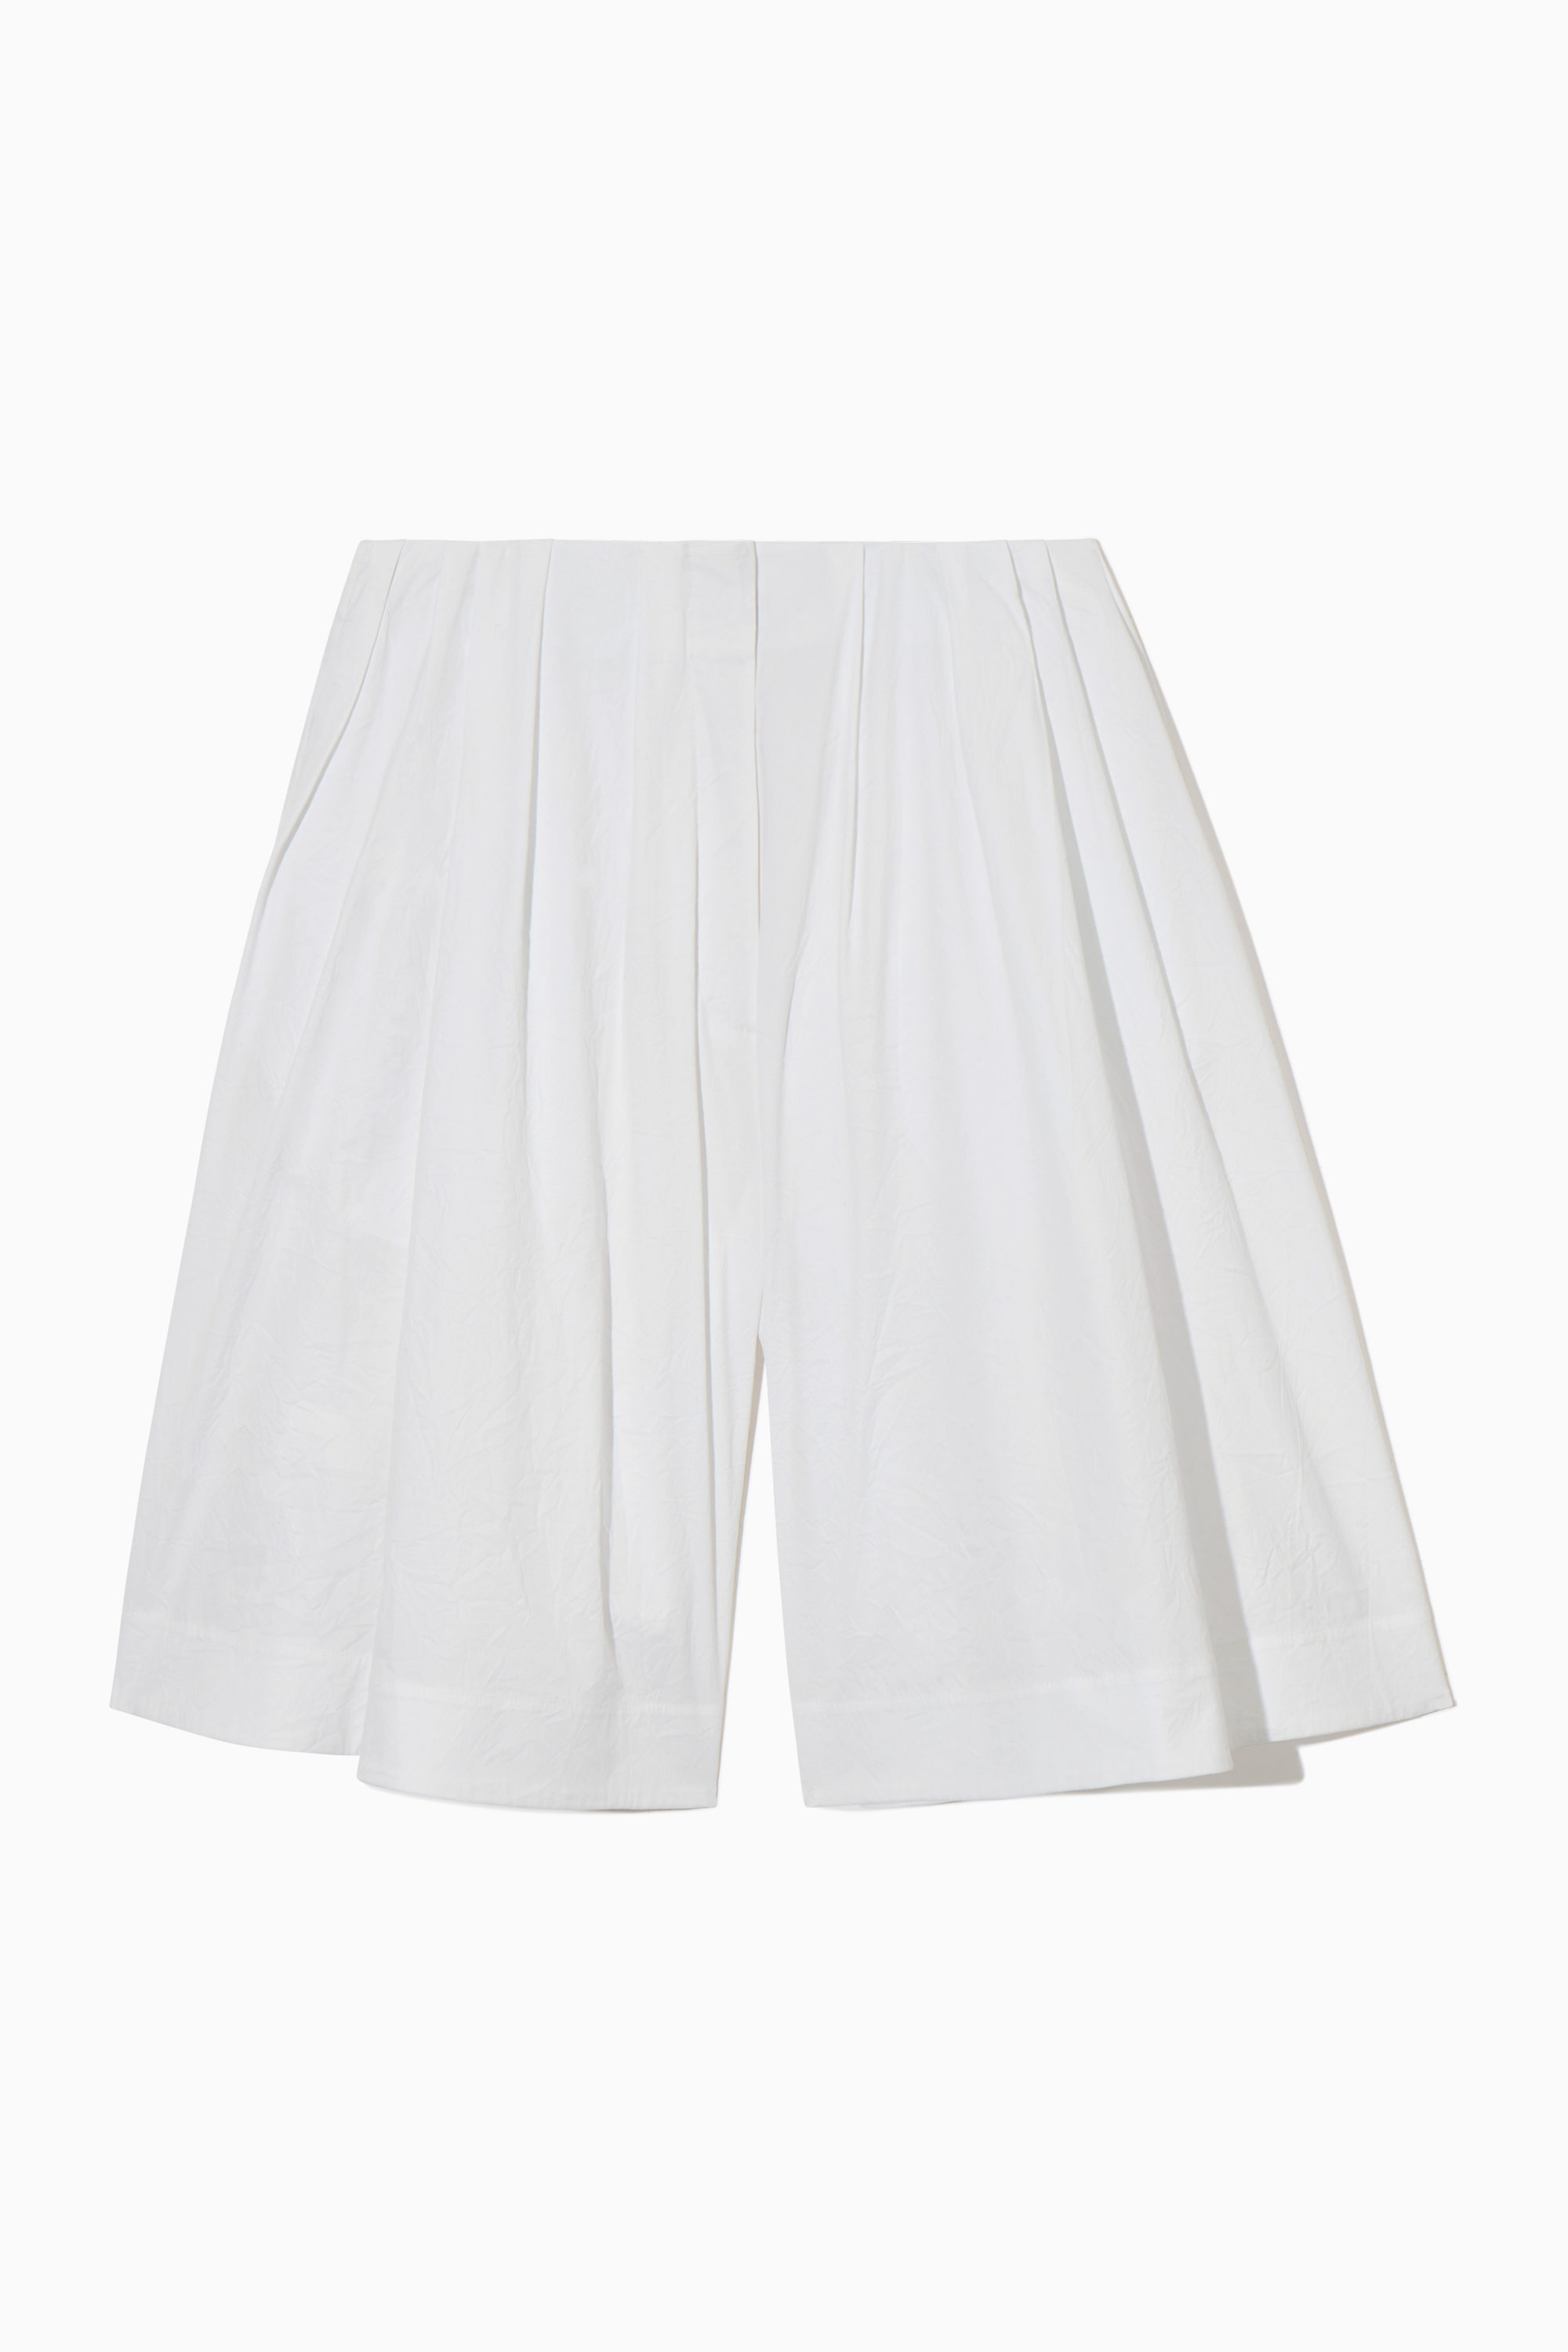 Anti-wrinkle space cotton A-line shorts elastic waistband pleated